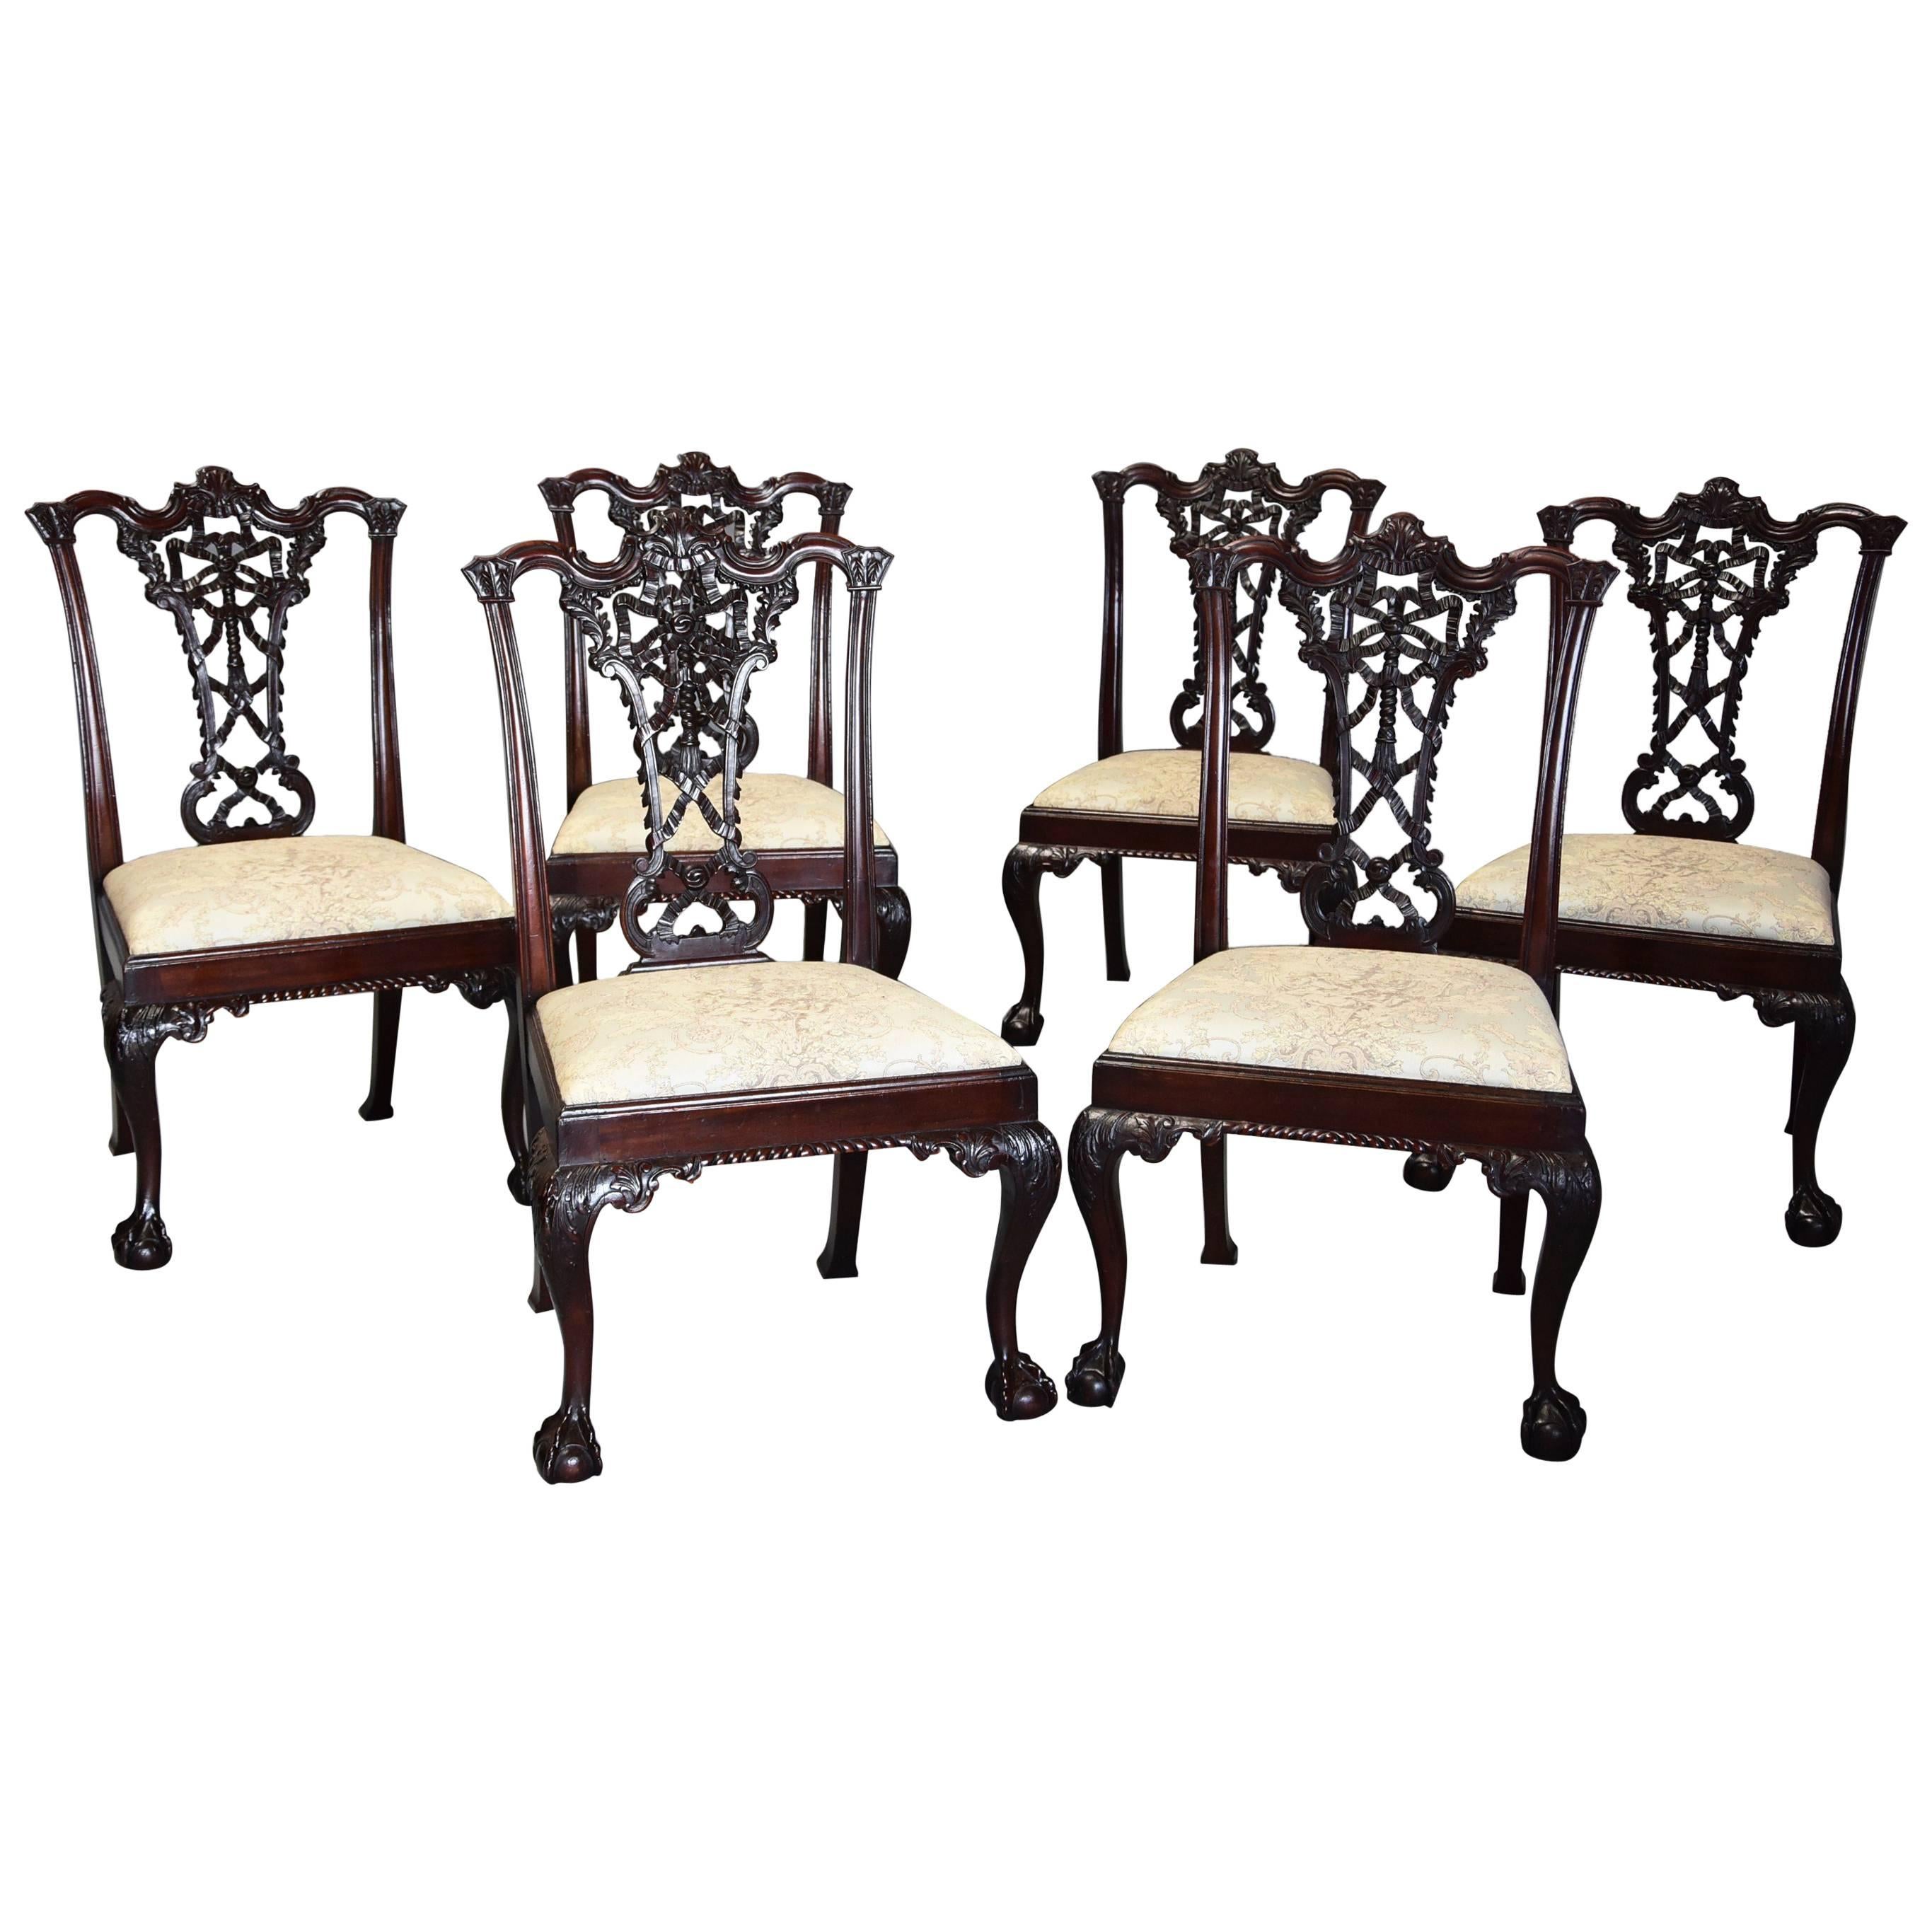 Early 20th Century Set of Six Mahogany Ribbon Back Chairs in Chippendale Style